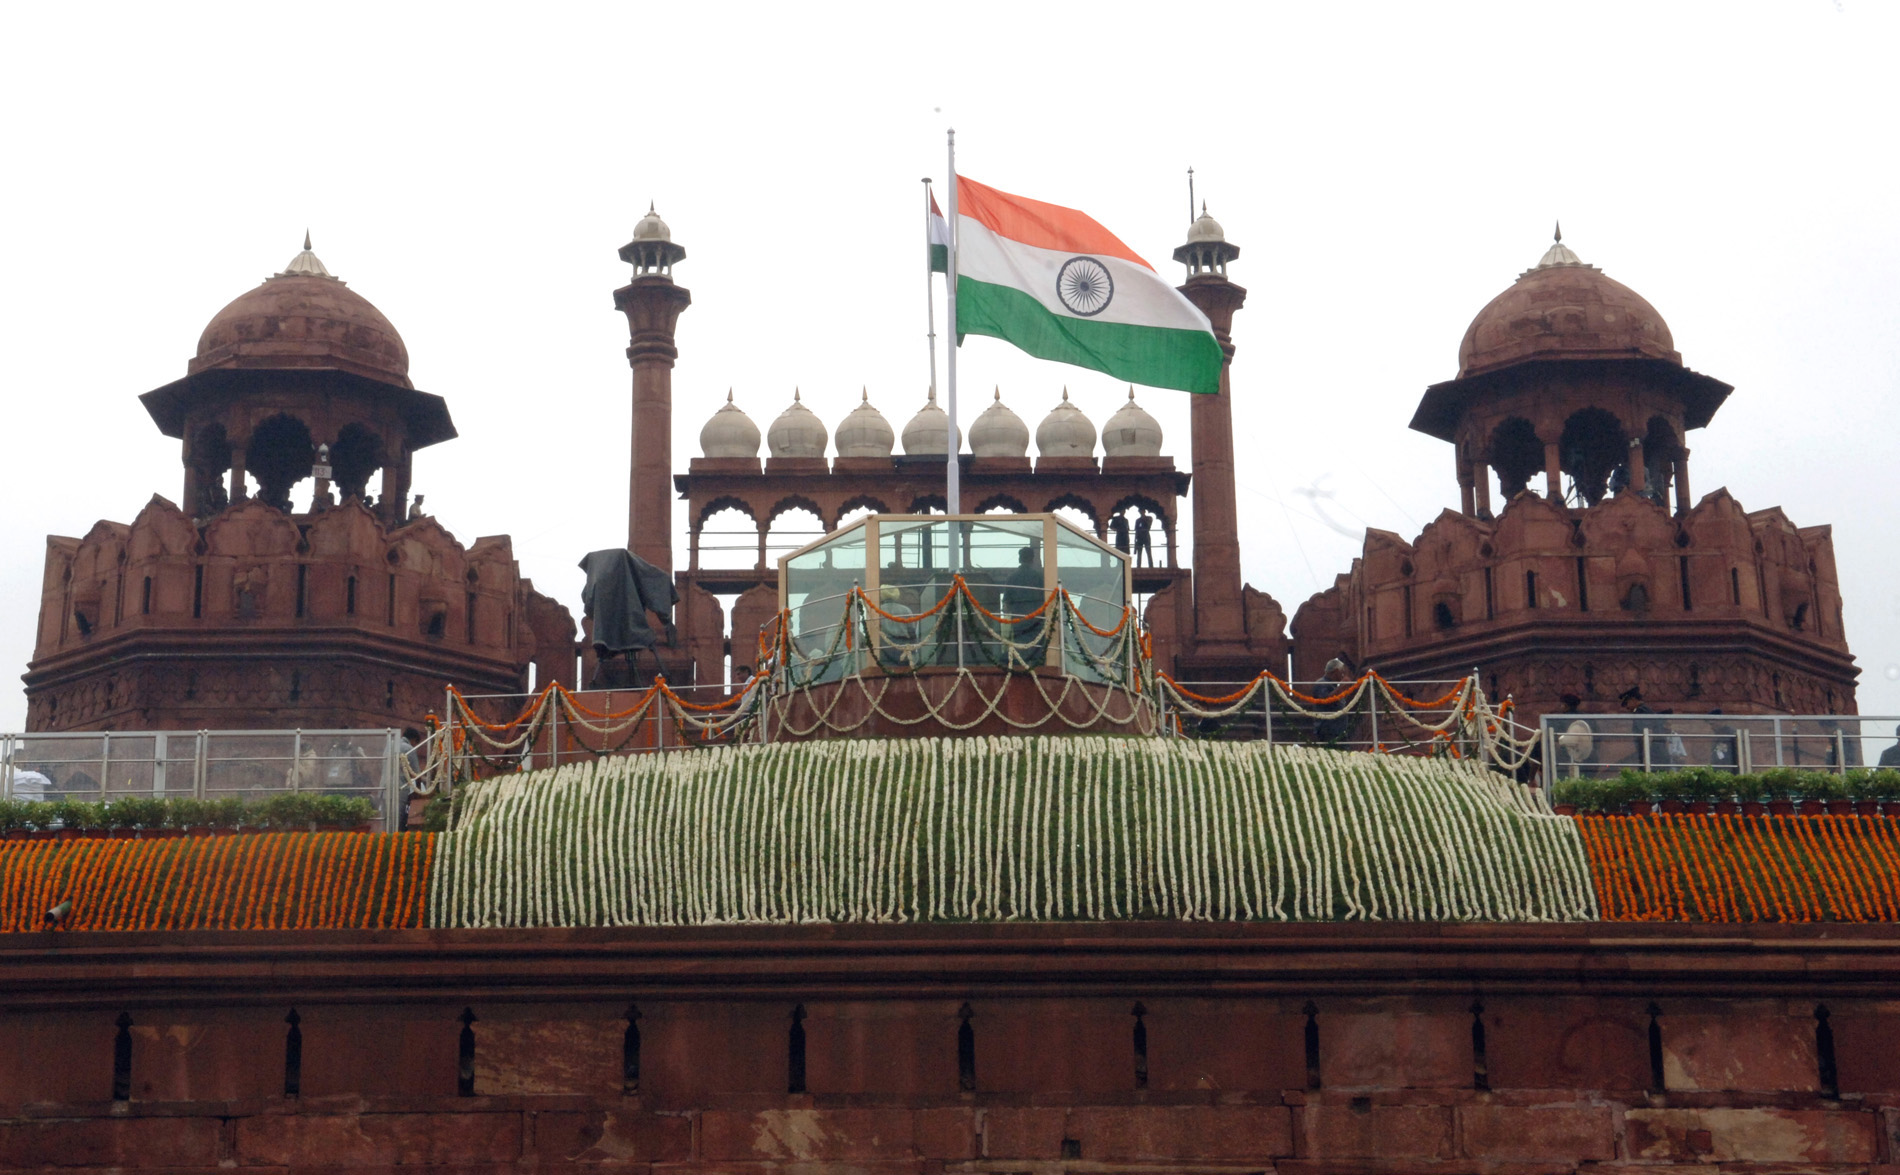 India's Independence